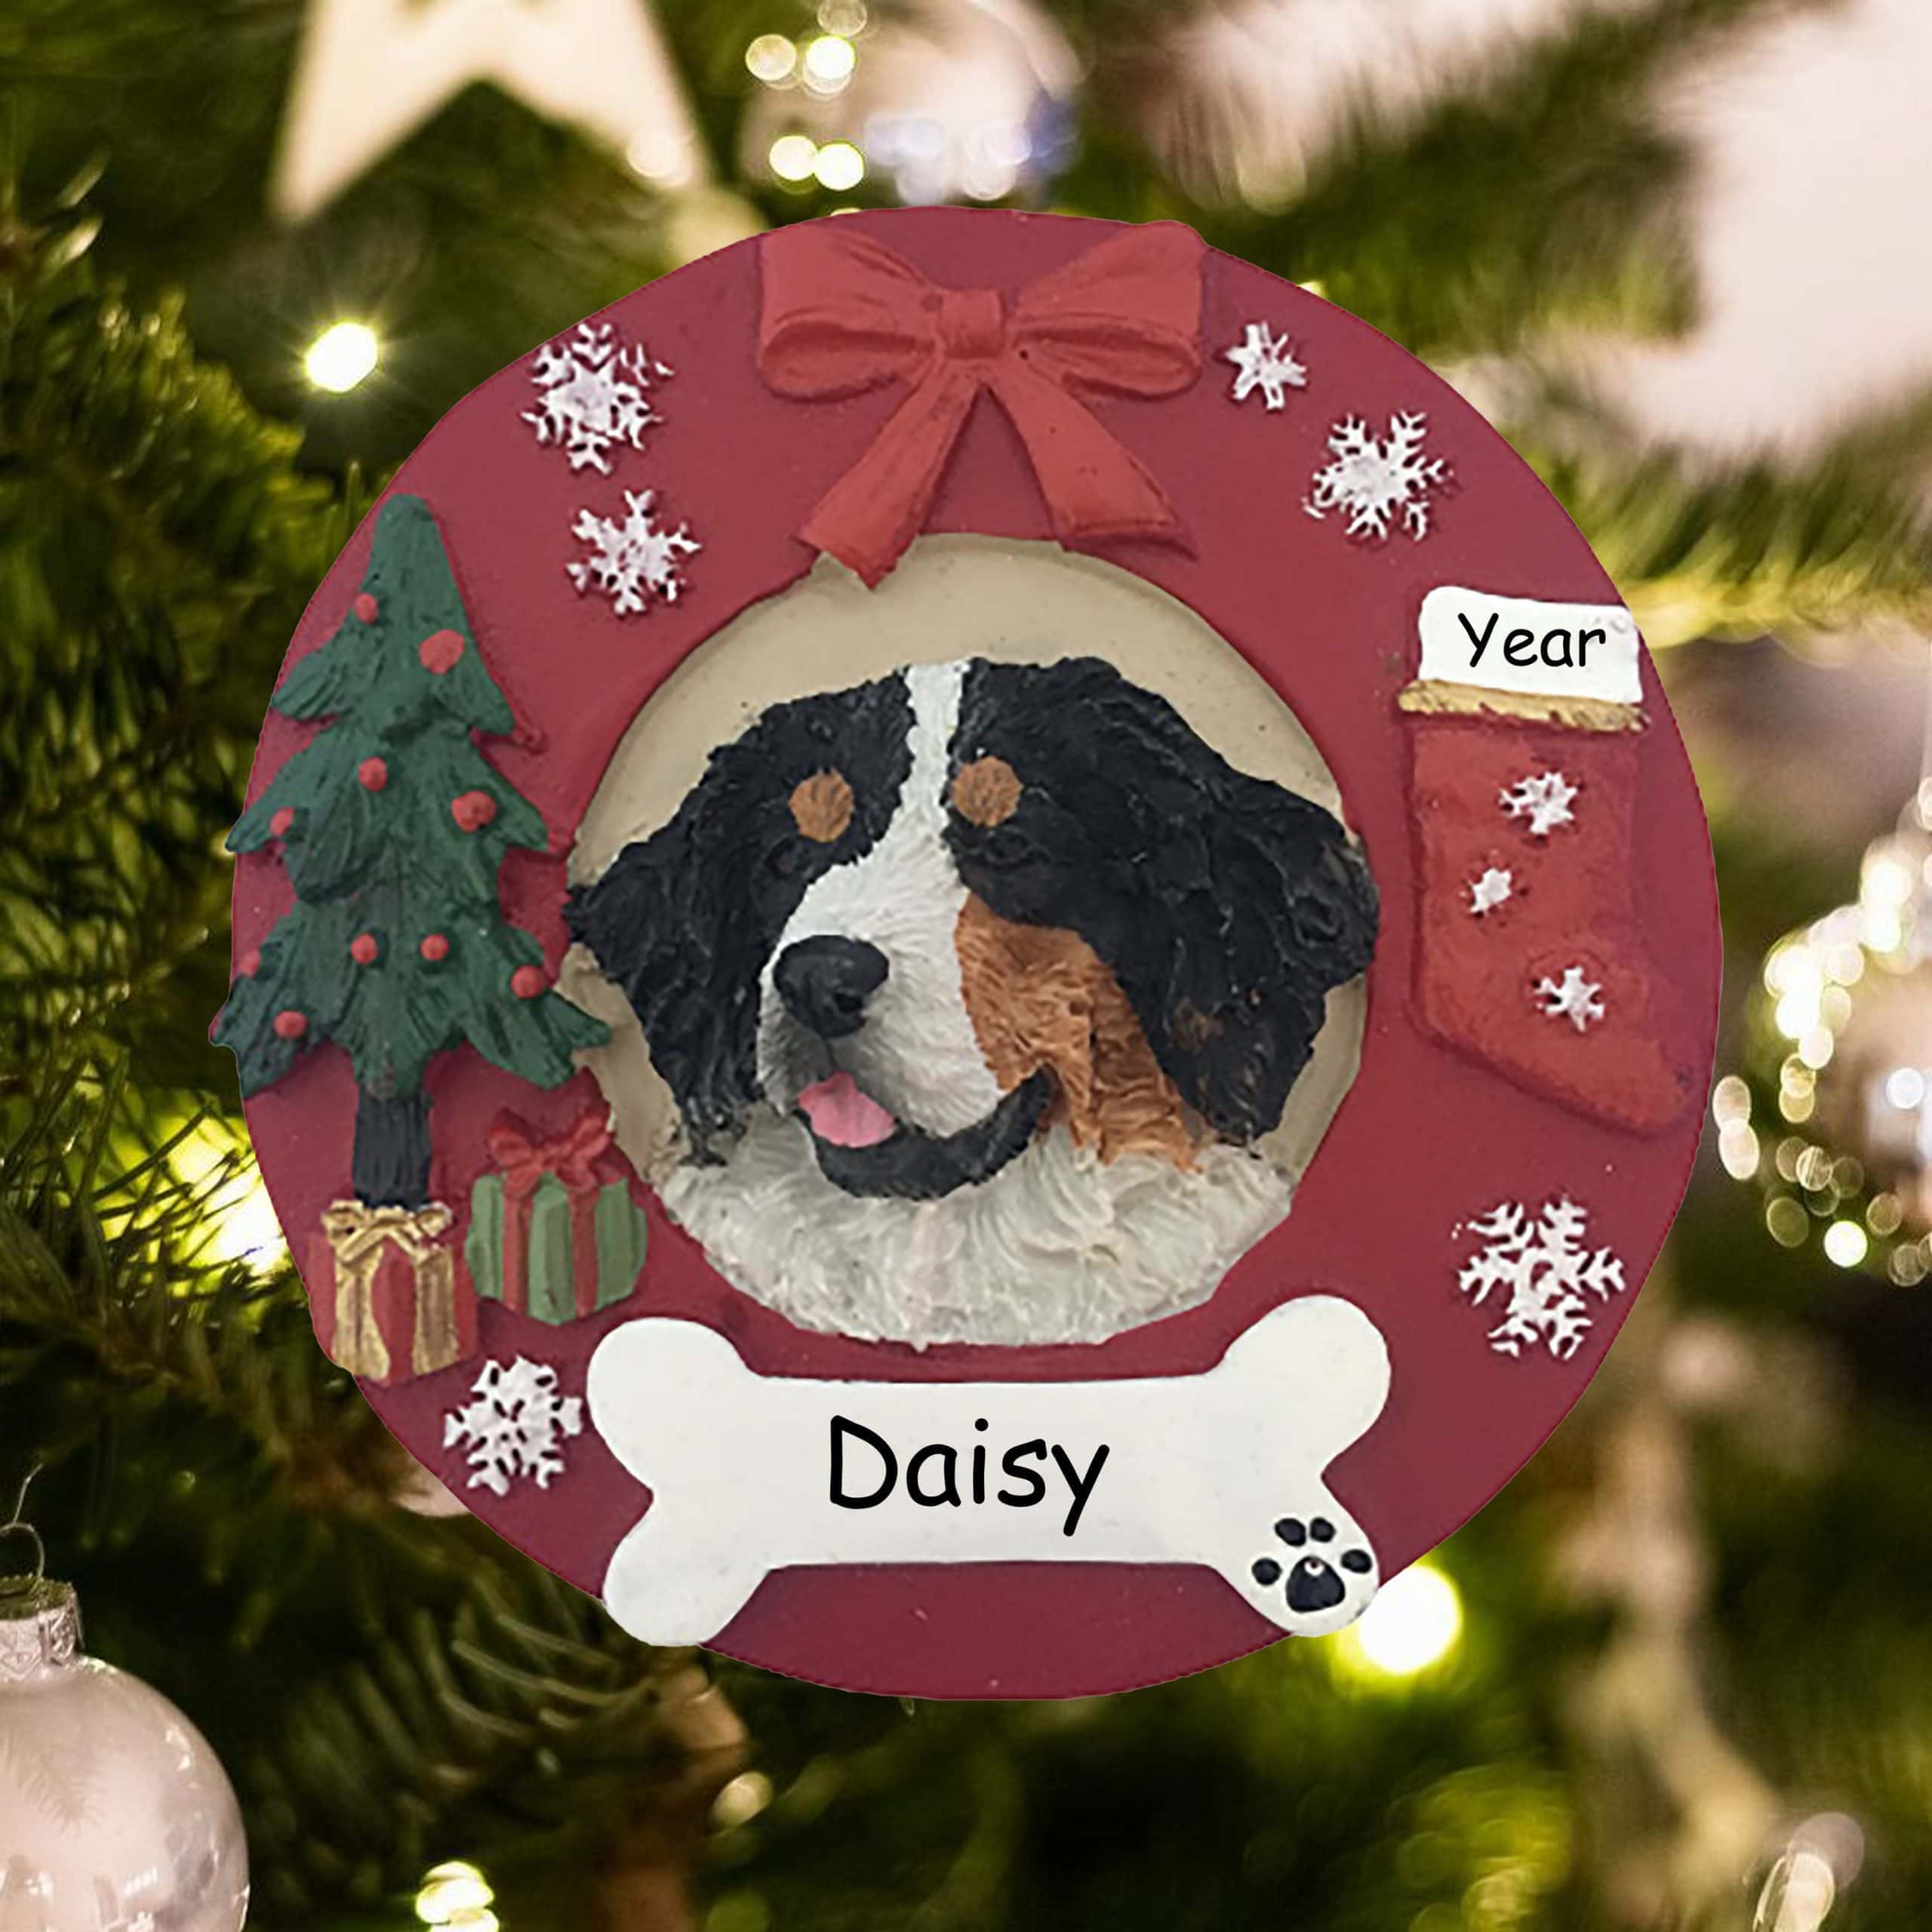 Four Wreath Designs Bernese Mountain Dog Christmas Ornament Personalization Available!